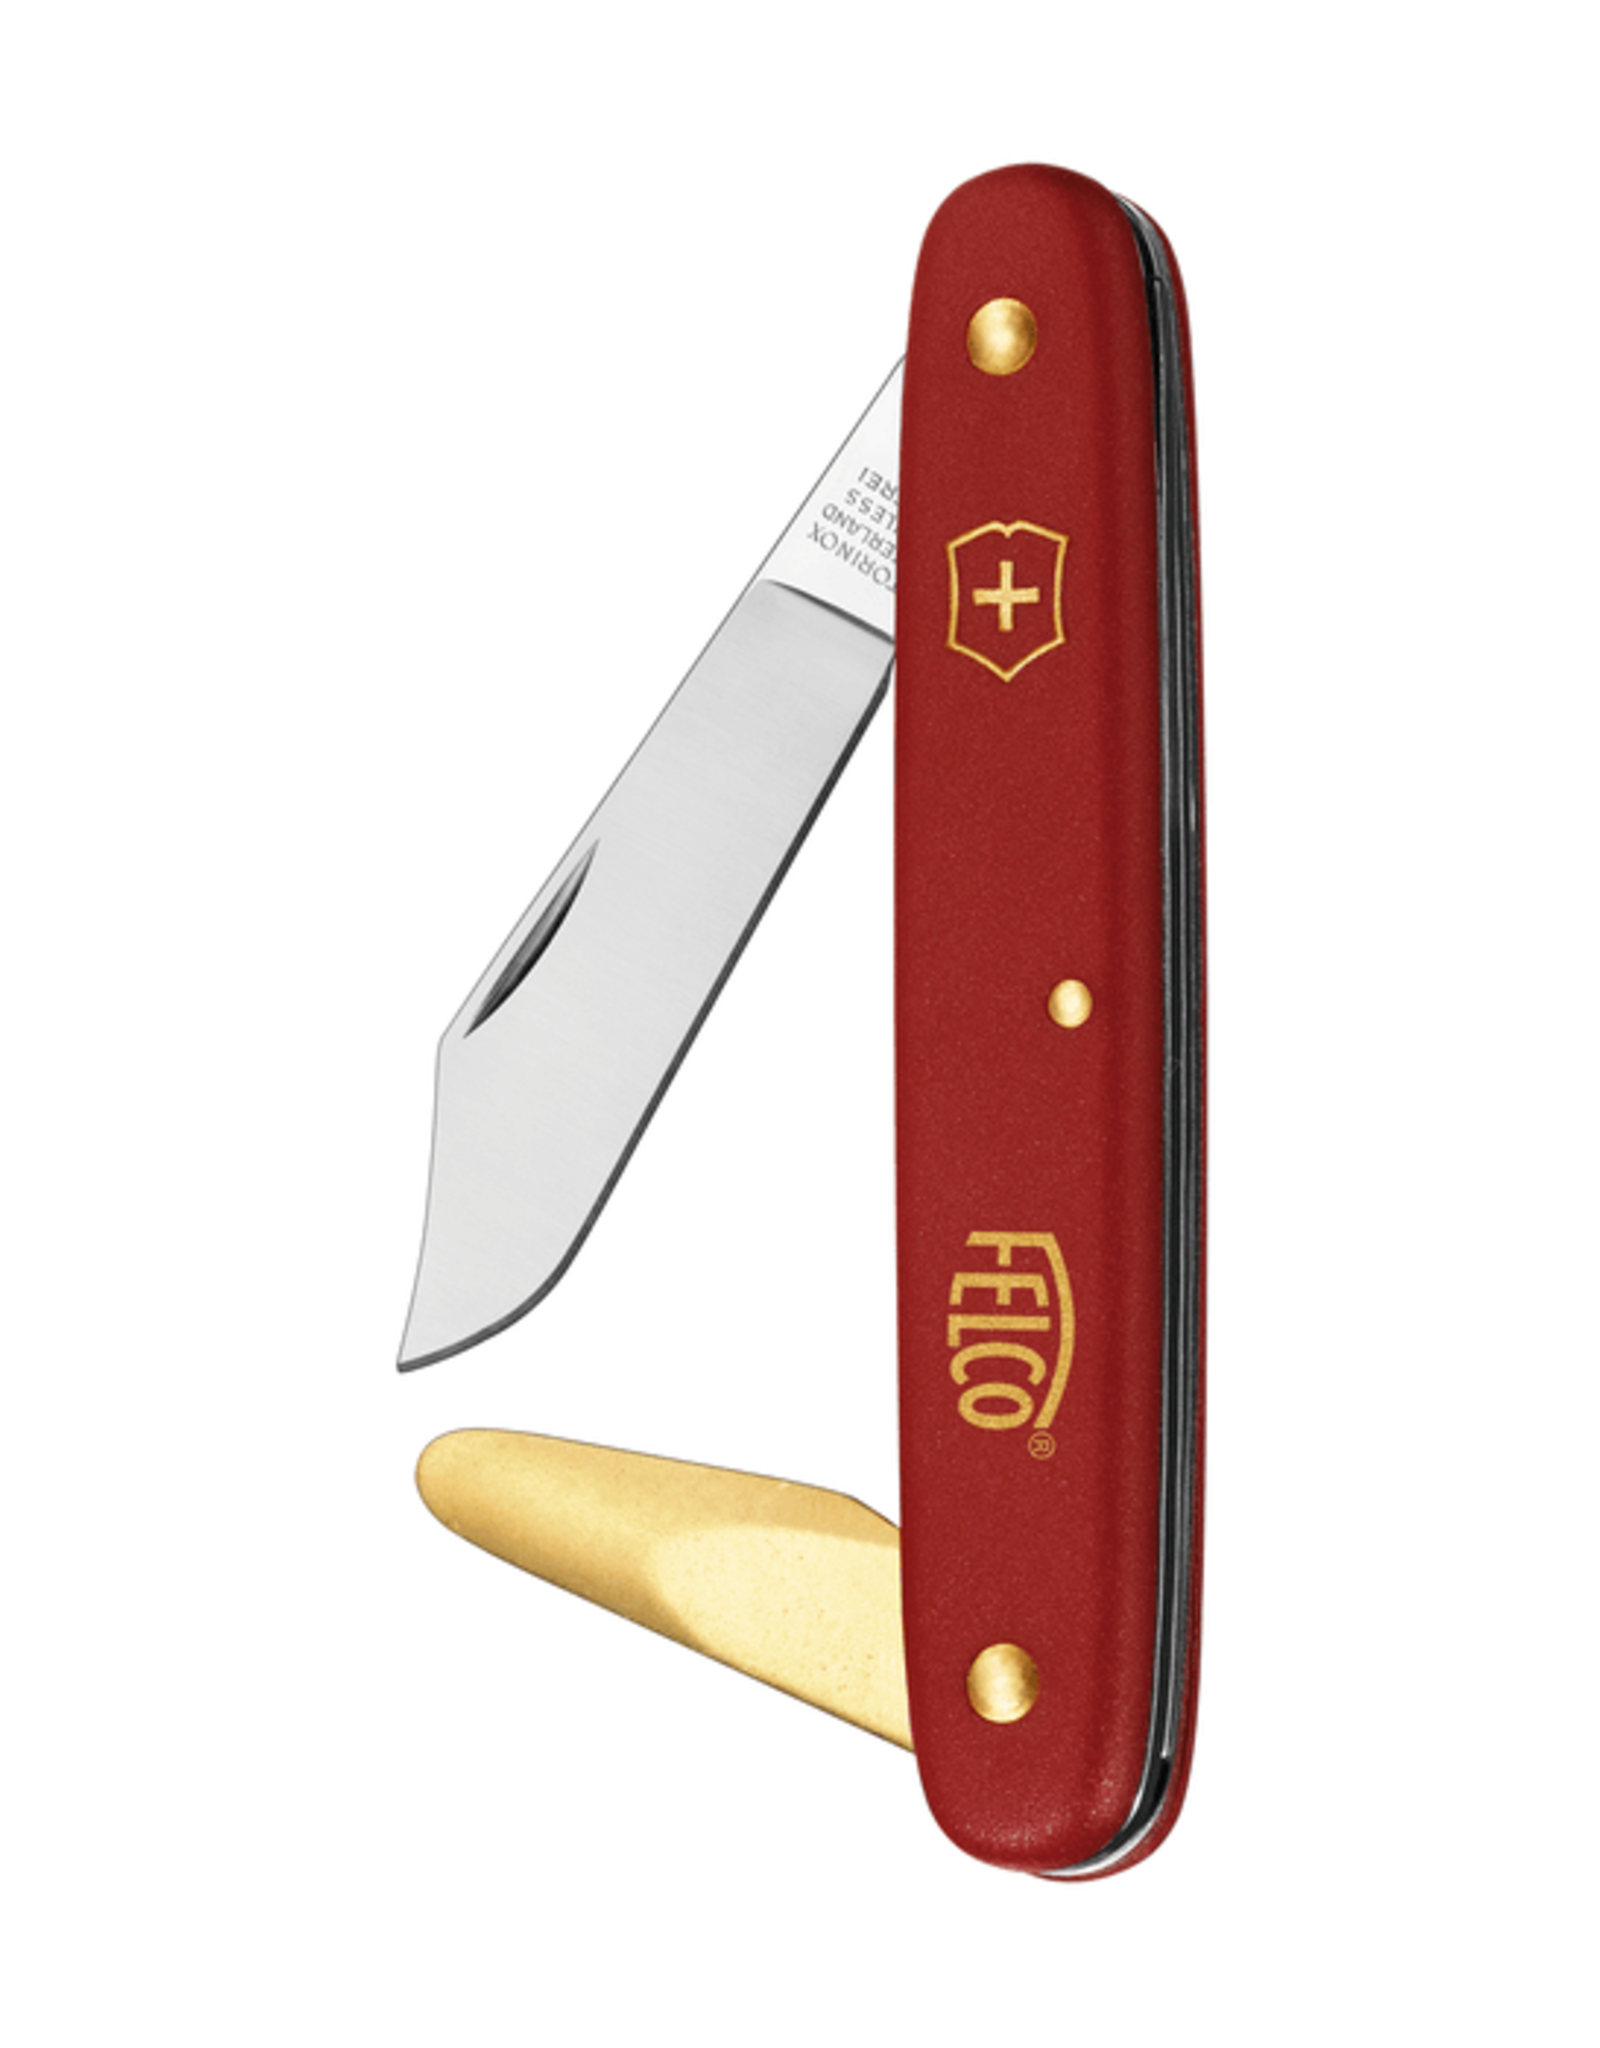 3.91 10 - Grafting and pruning knive - All-purpose budding knife